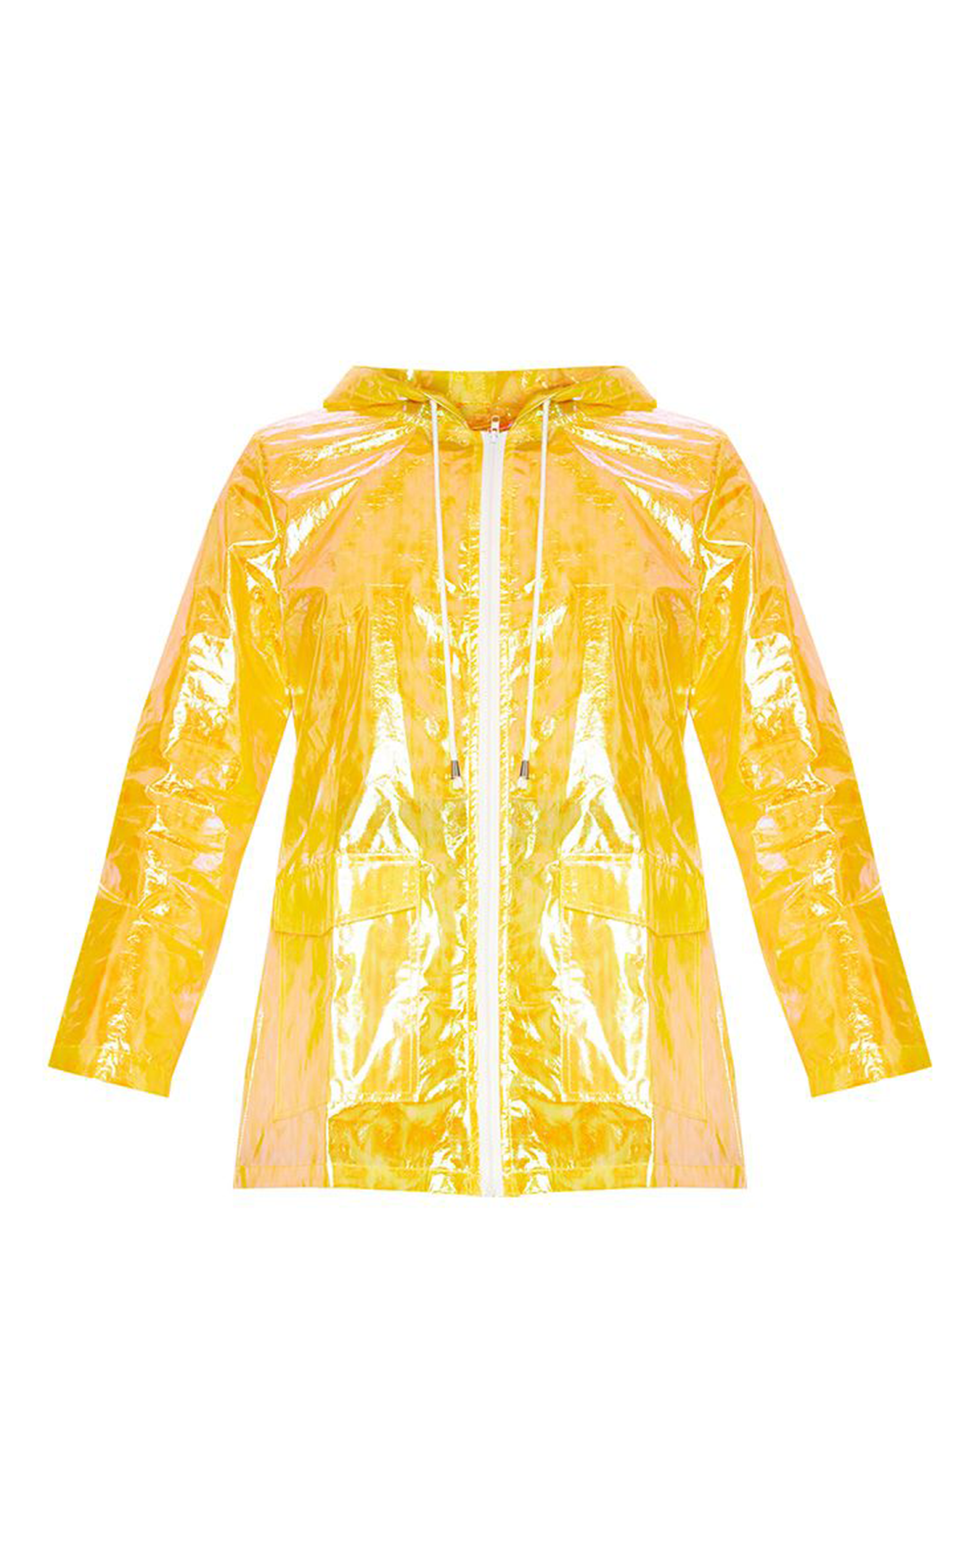 Clothing, Yellow, Outerwear, Sleeve, Raincoat, Blouse, Jacket, Top, 